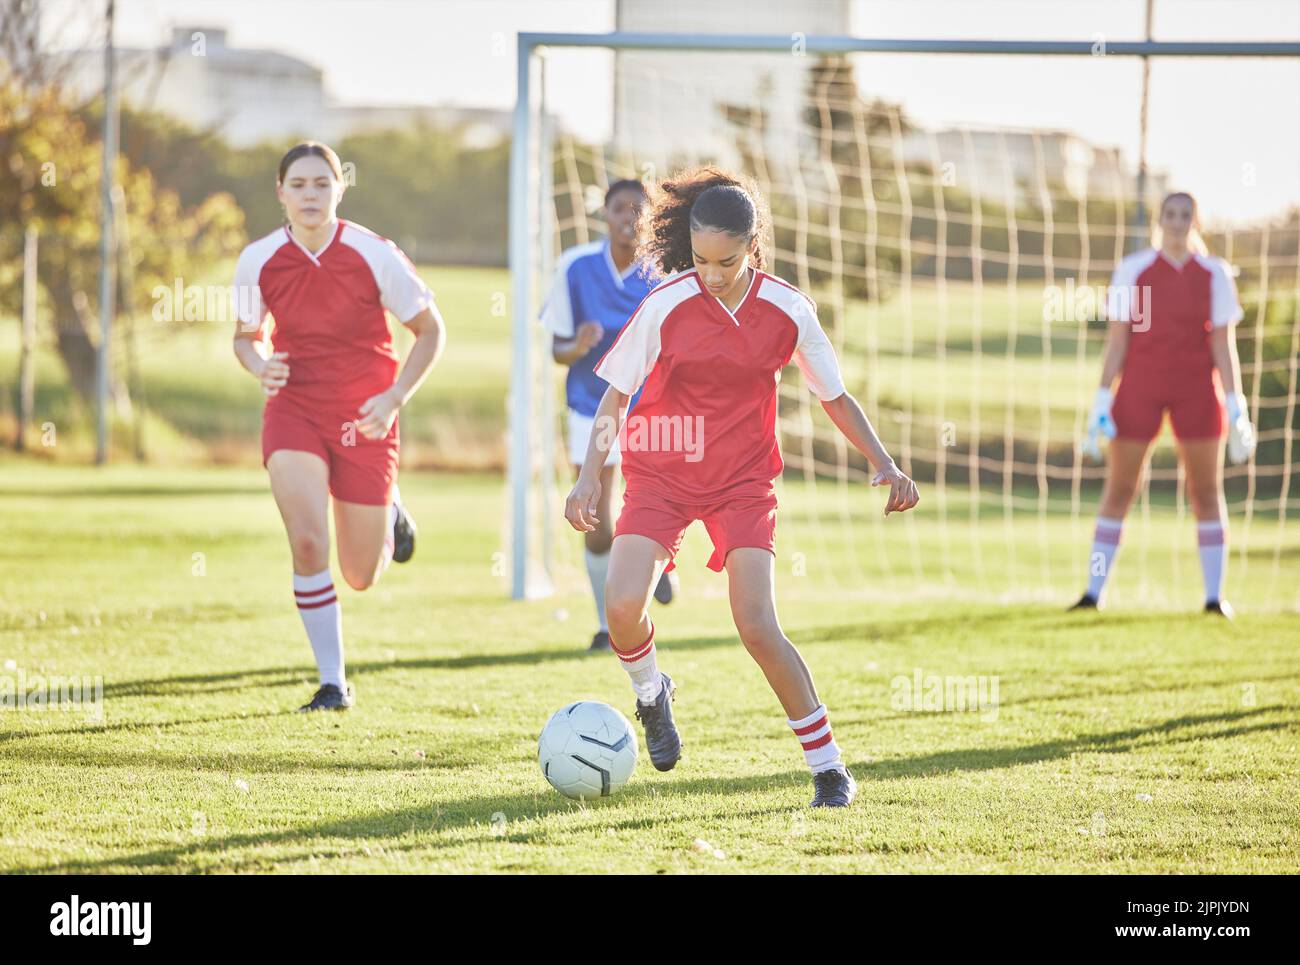 Female football, sports and girls team playing match on field while kicking, tackling and running with a ball. Energy, fast and skilled soccer players Stock Photo